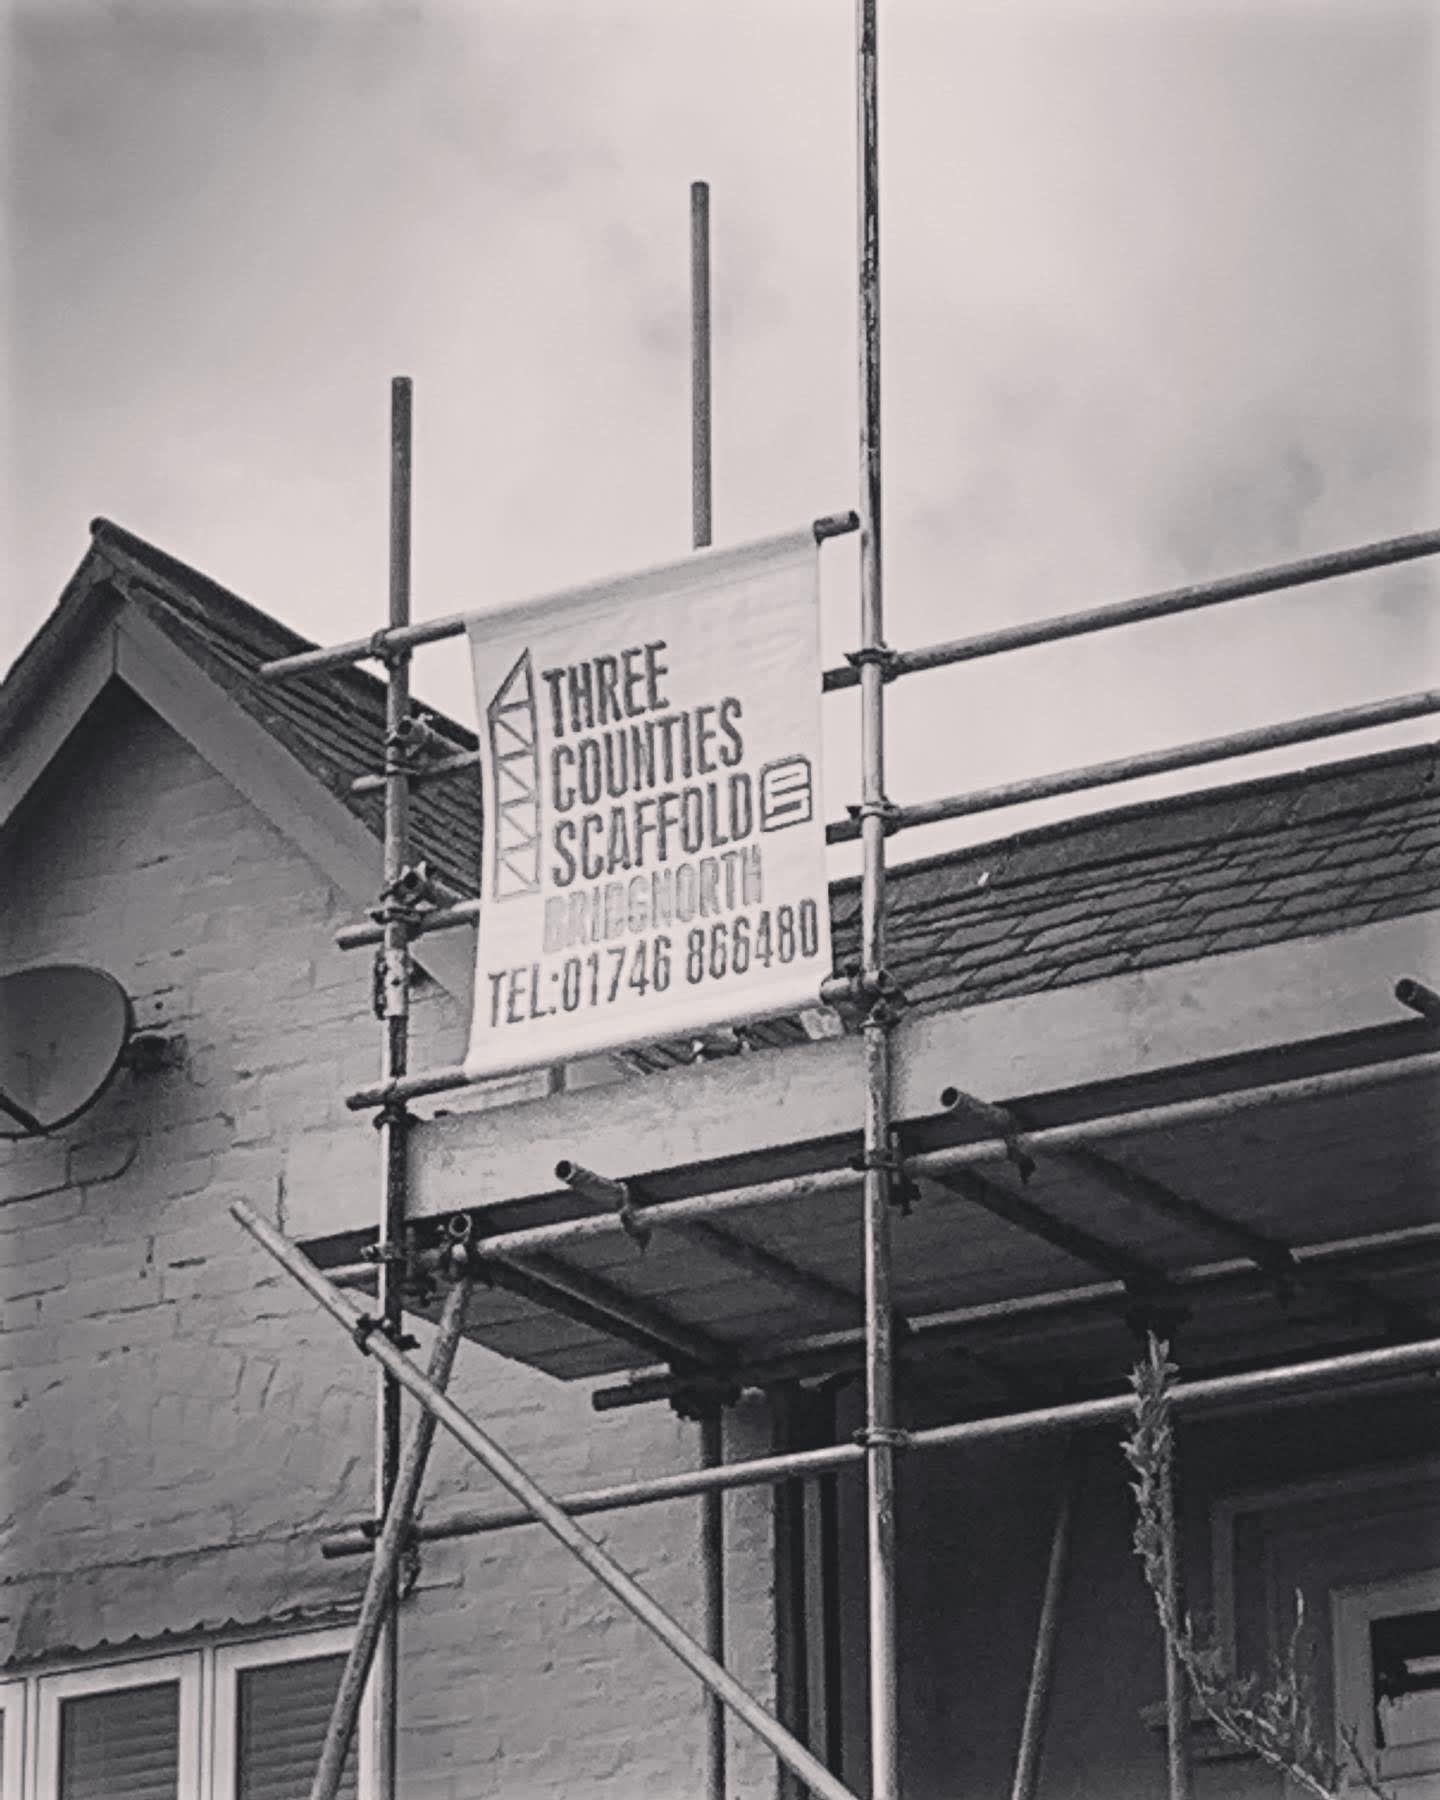 Images Three Counties Scaffold Ltd